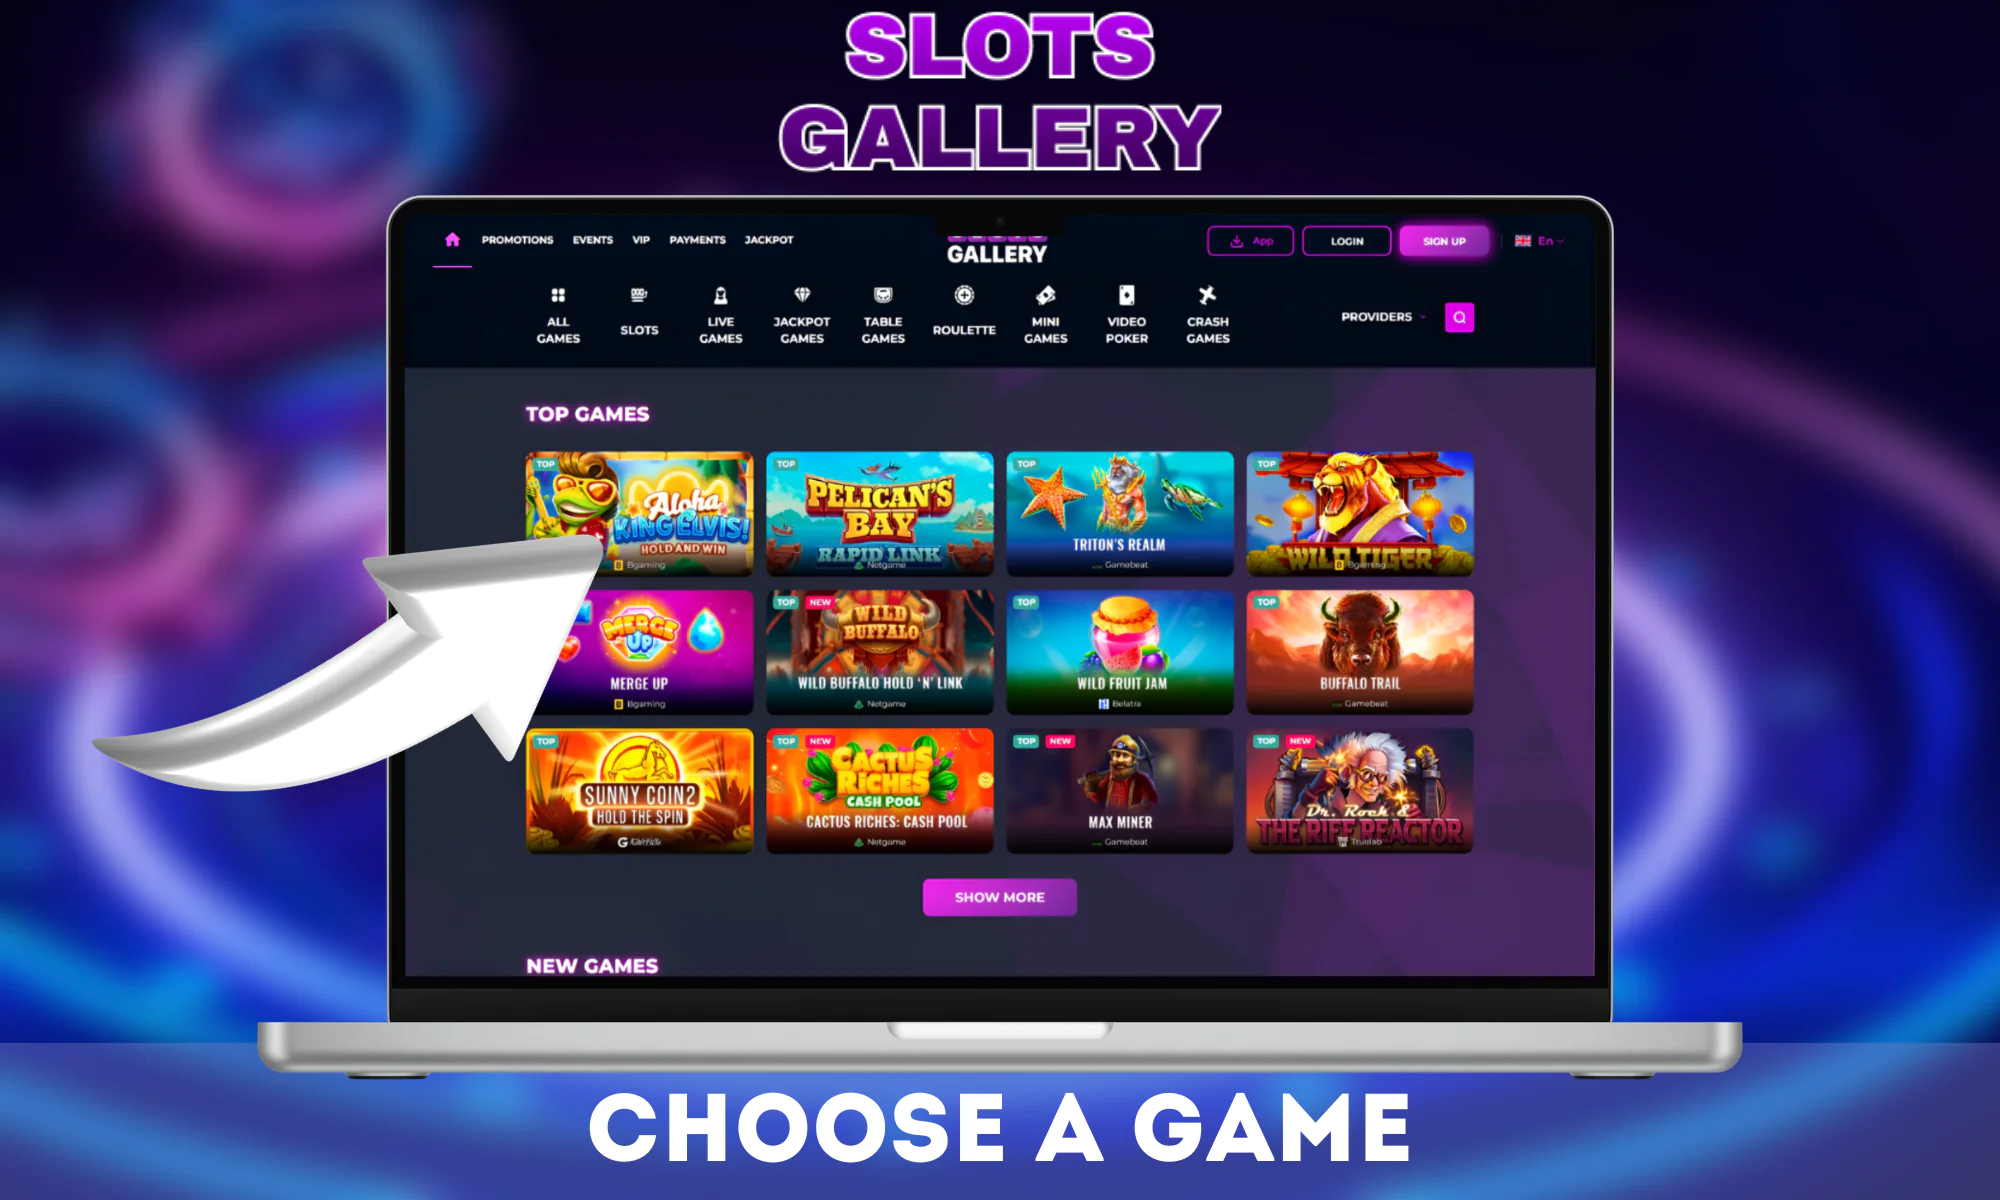 Next, choose your favorite game from the extensive library of Slots Gallery games